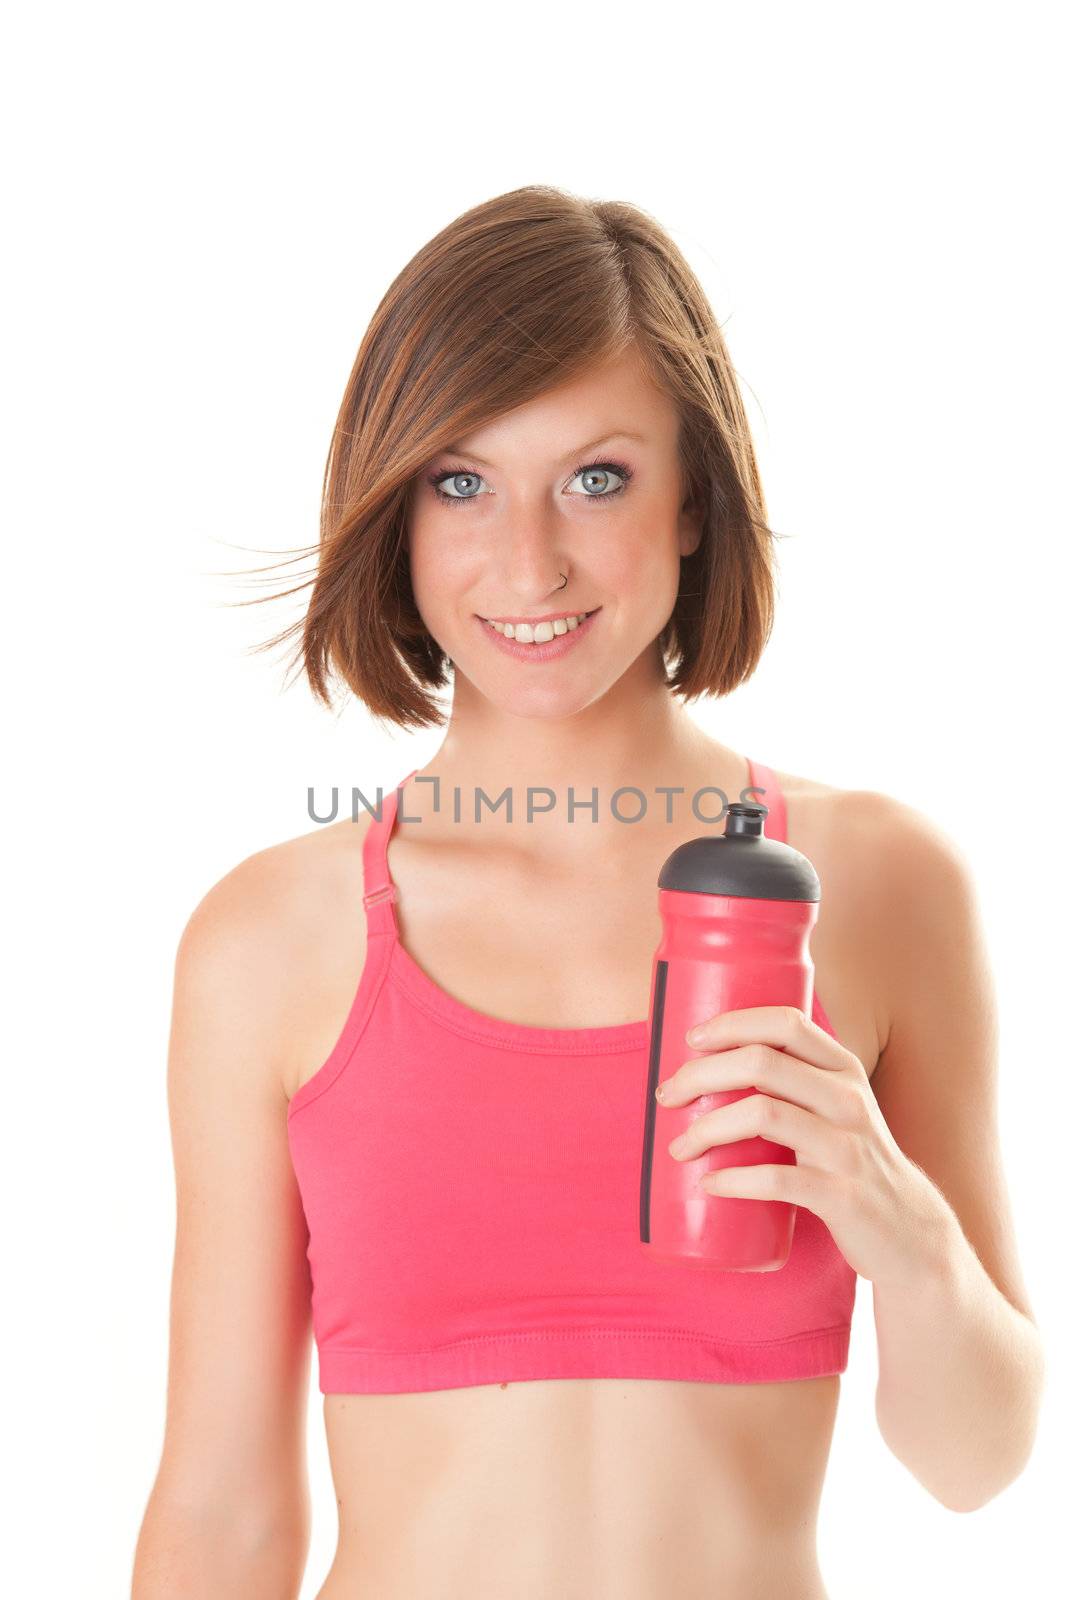 young beautiful sport woman portrait with a bottle isolated on w by Lcrespi